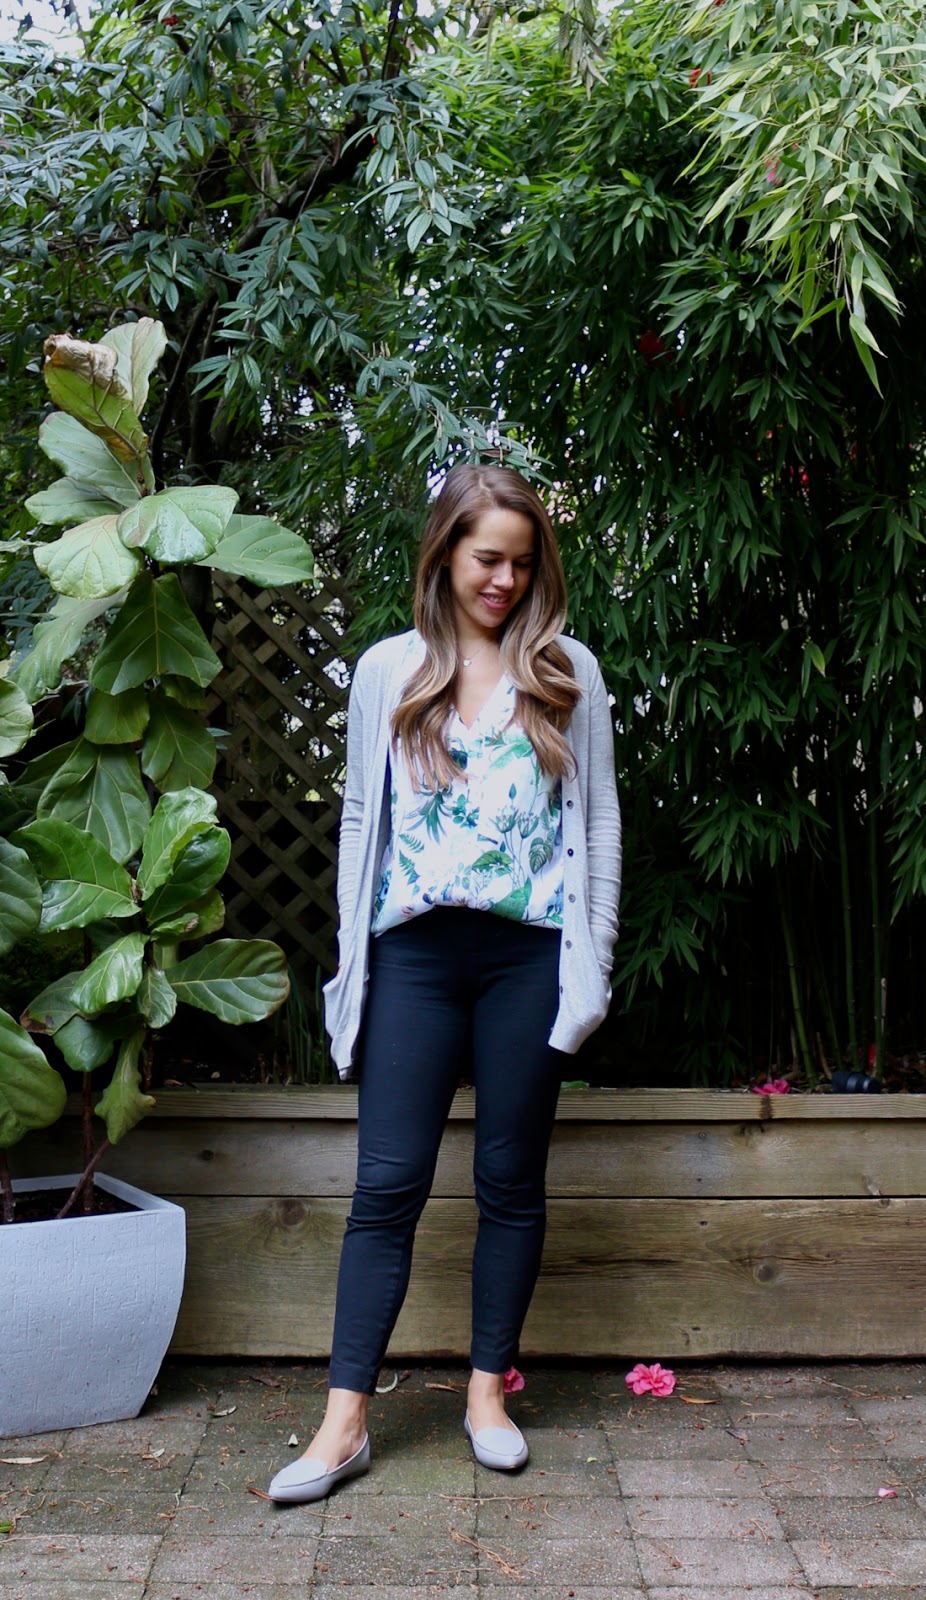 Jules in Flats - Botanical Print Sleeveless Top (Business Casual Spring Workwear on a Budget)